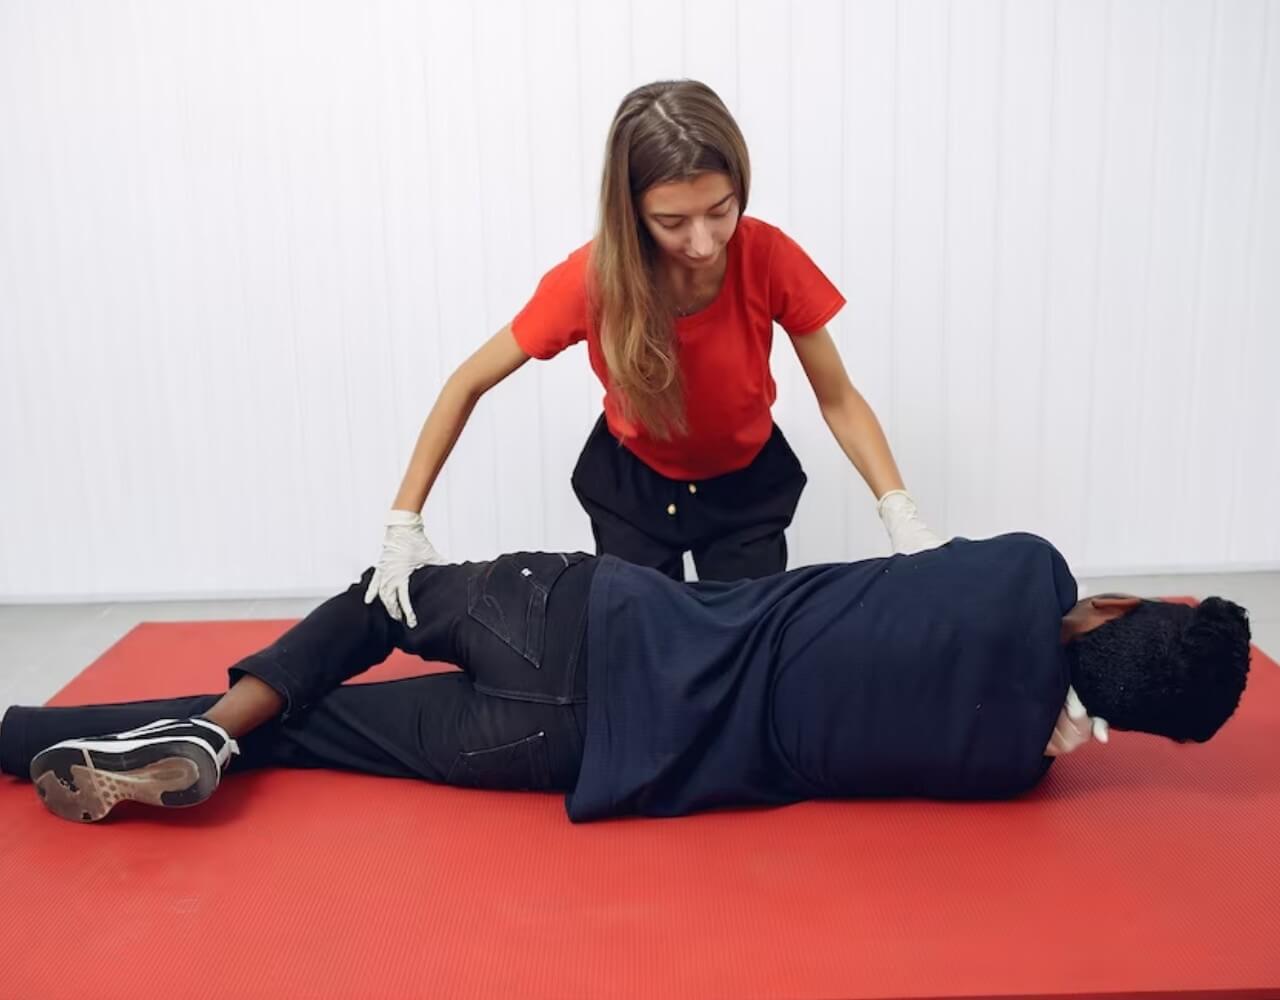 Emergency First Aid at Work training